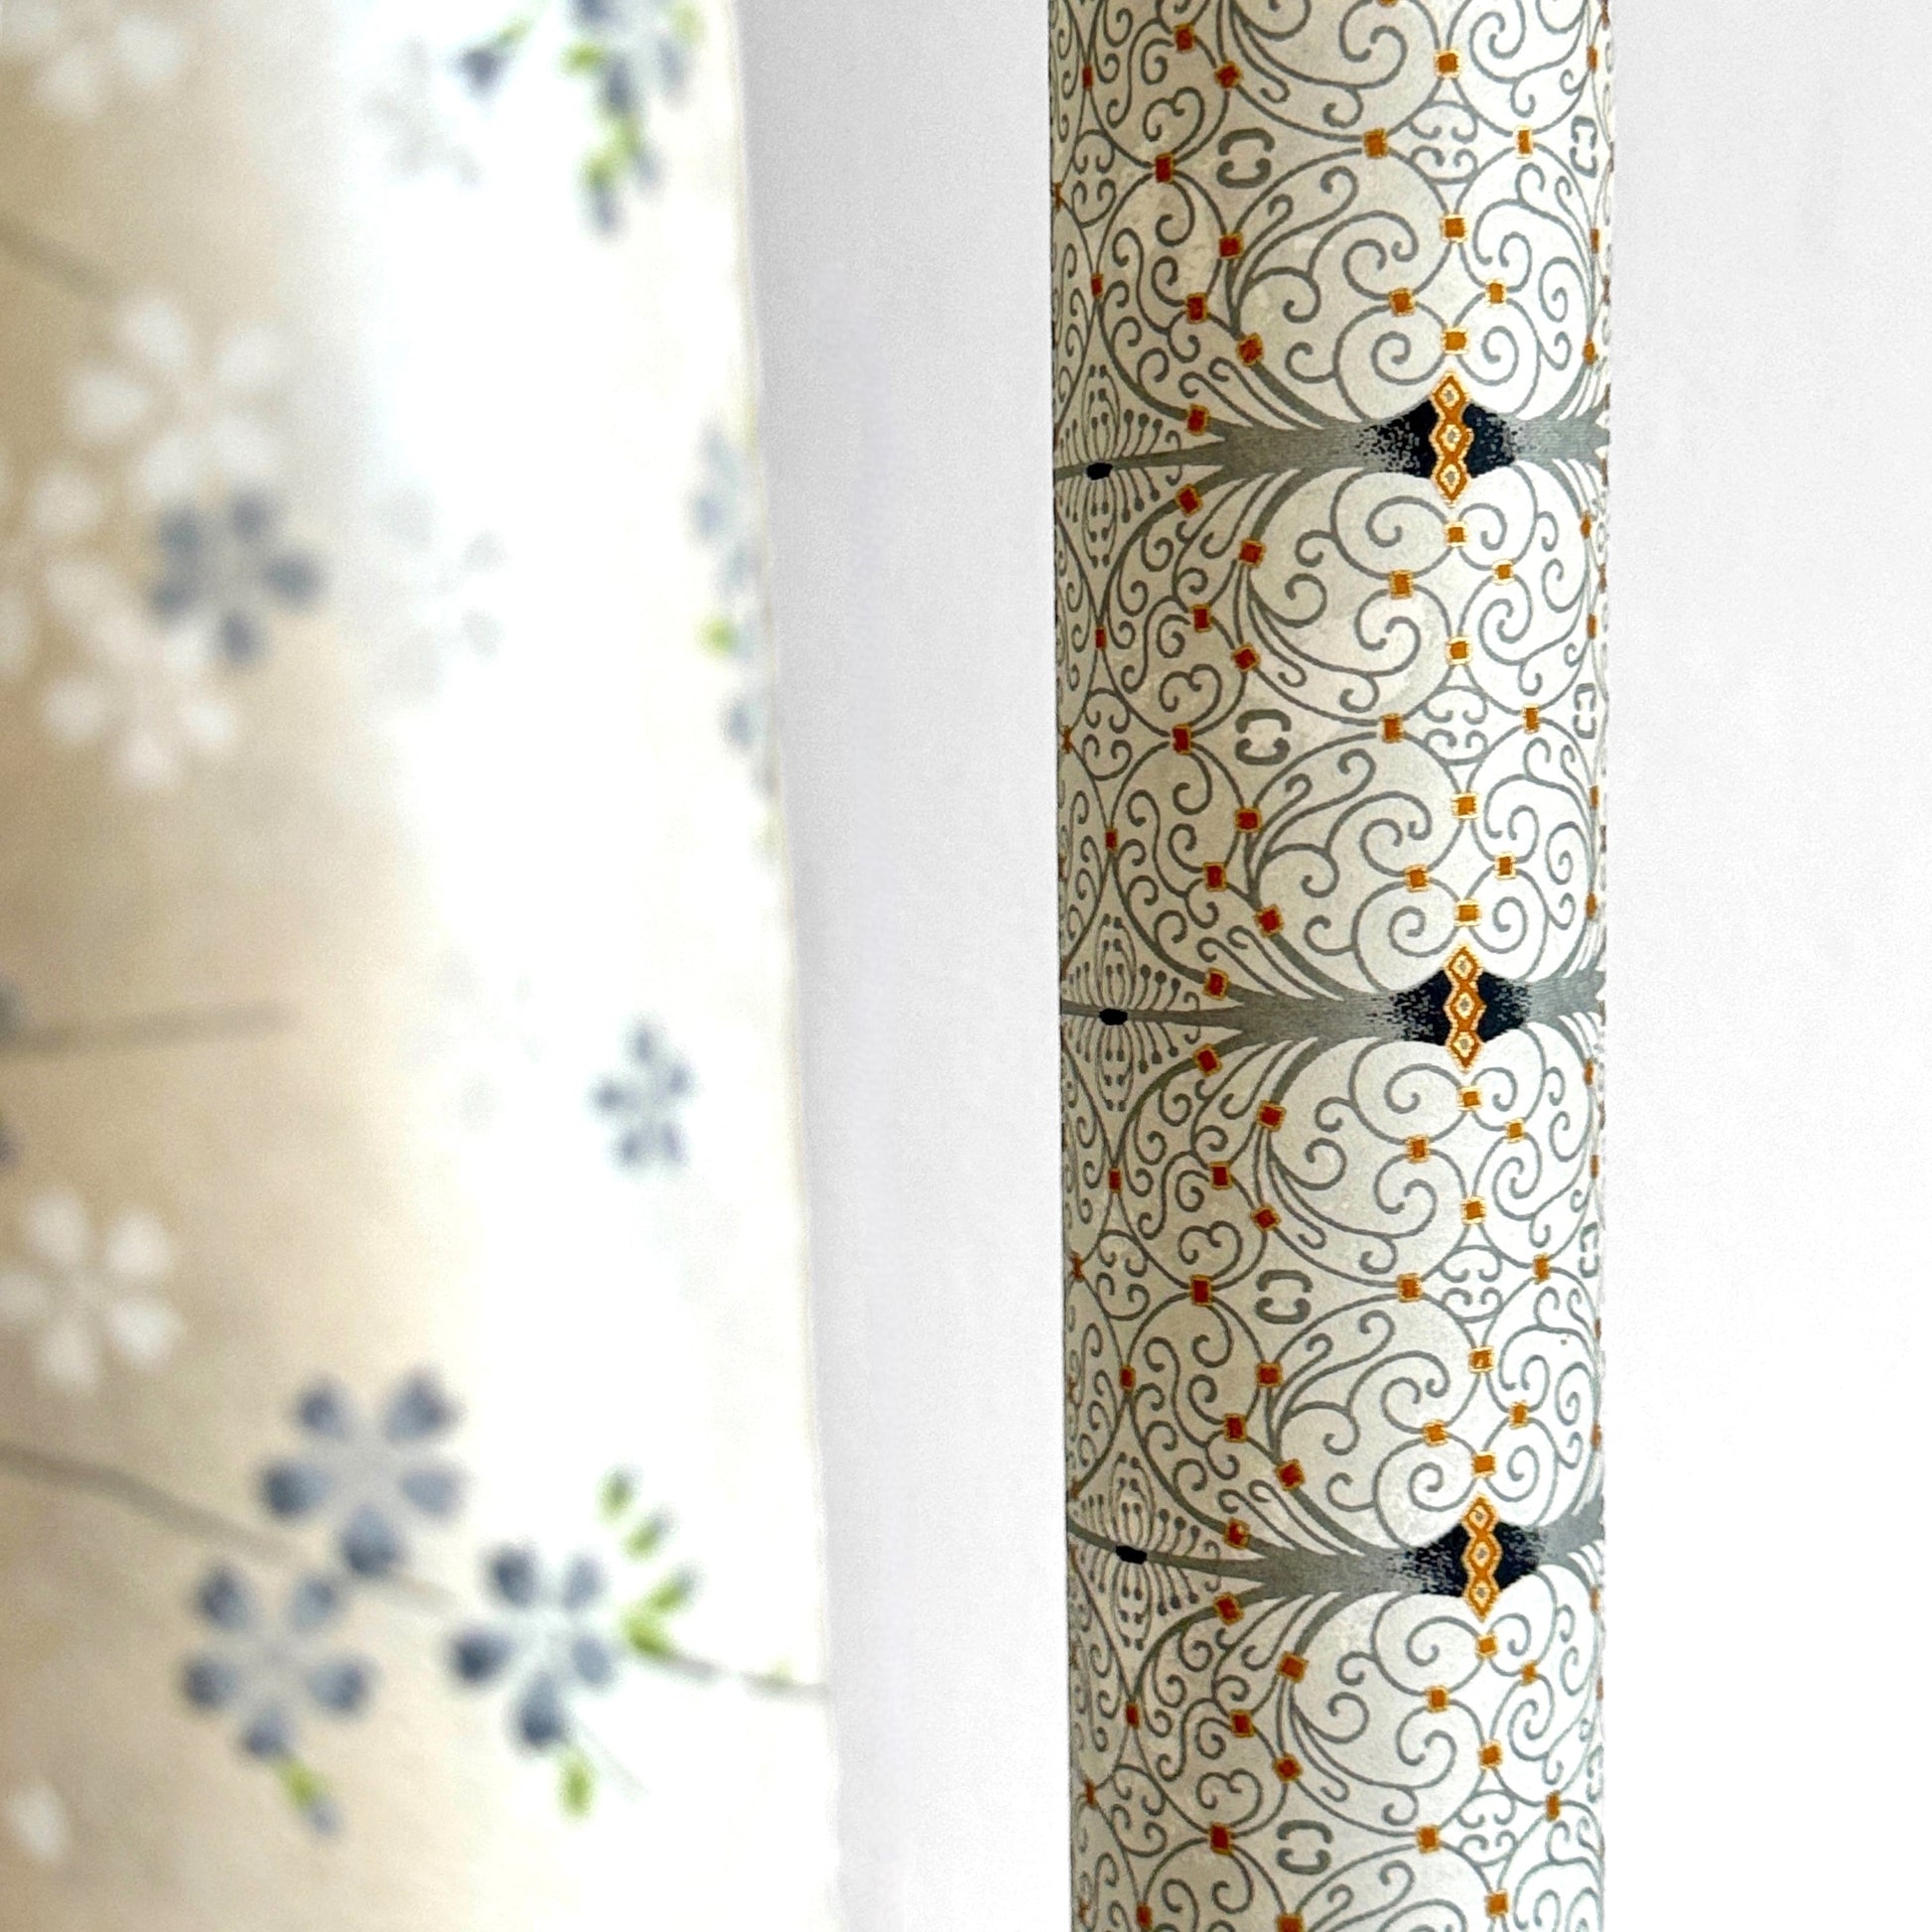 Japanese silkscreen chiyogami paper with a intricate filigree trellis design in grey with gold accent. Pictured rolled